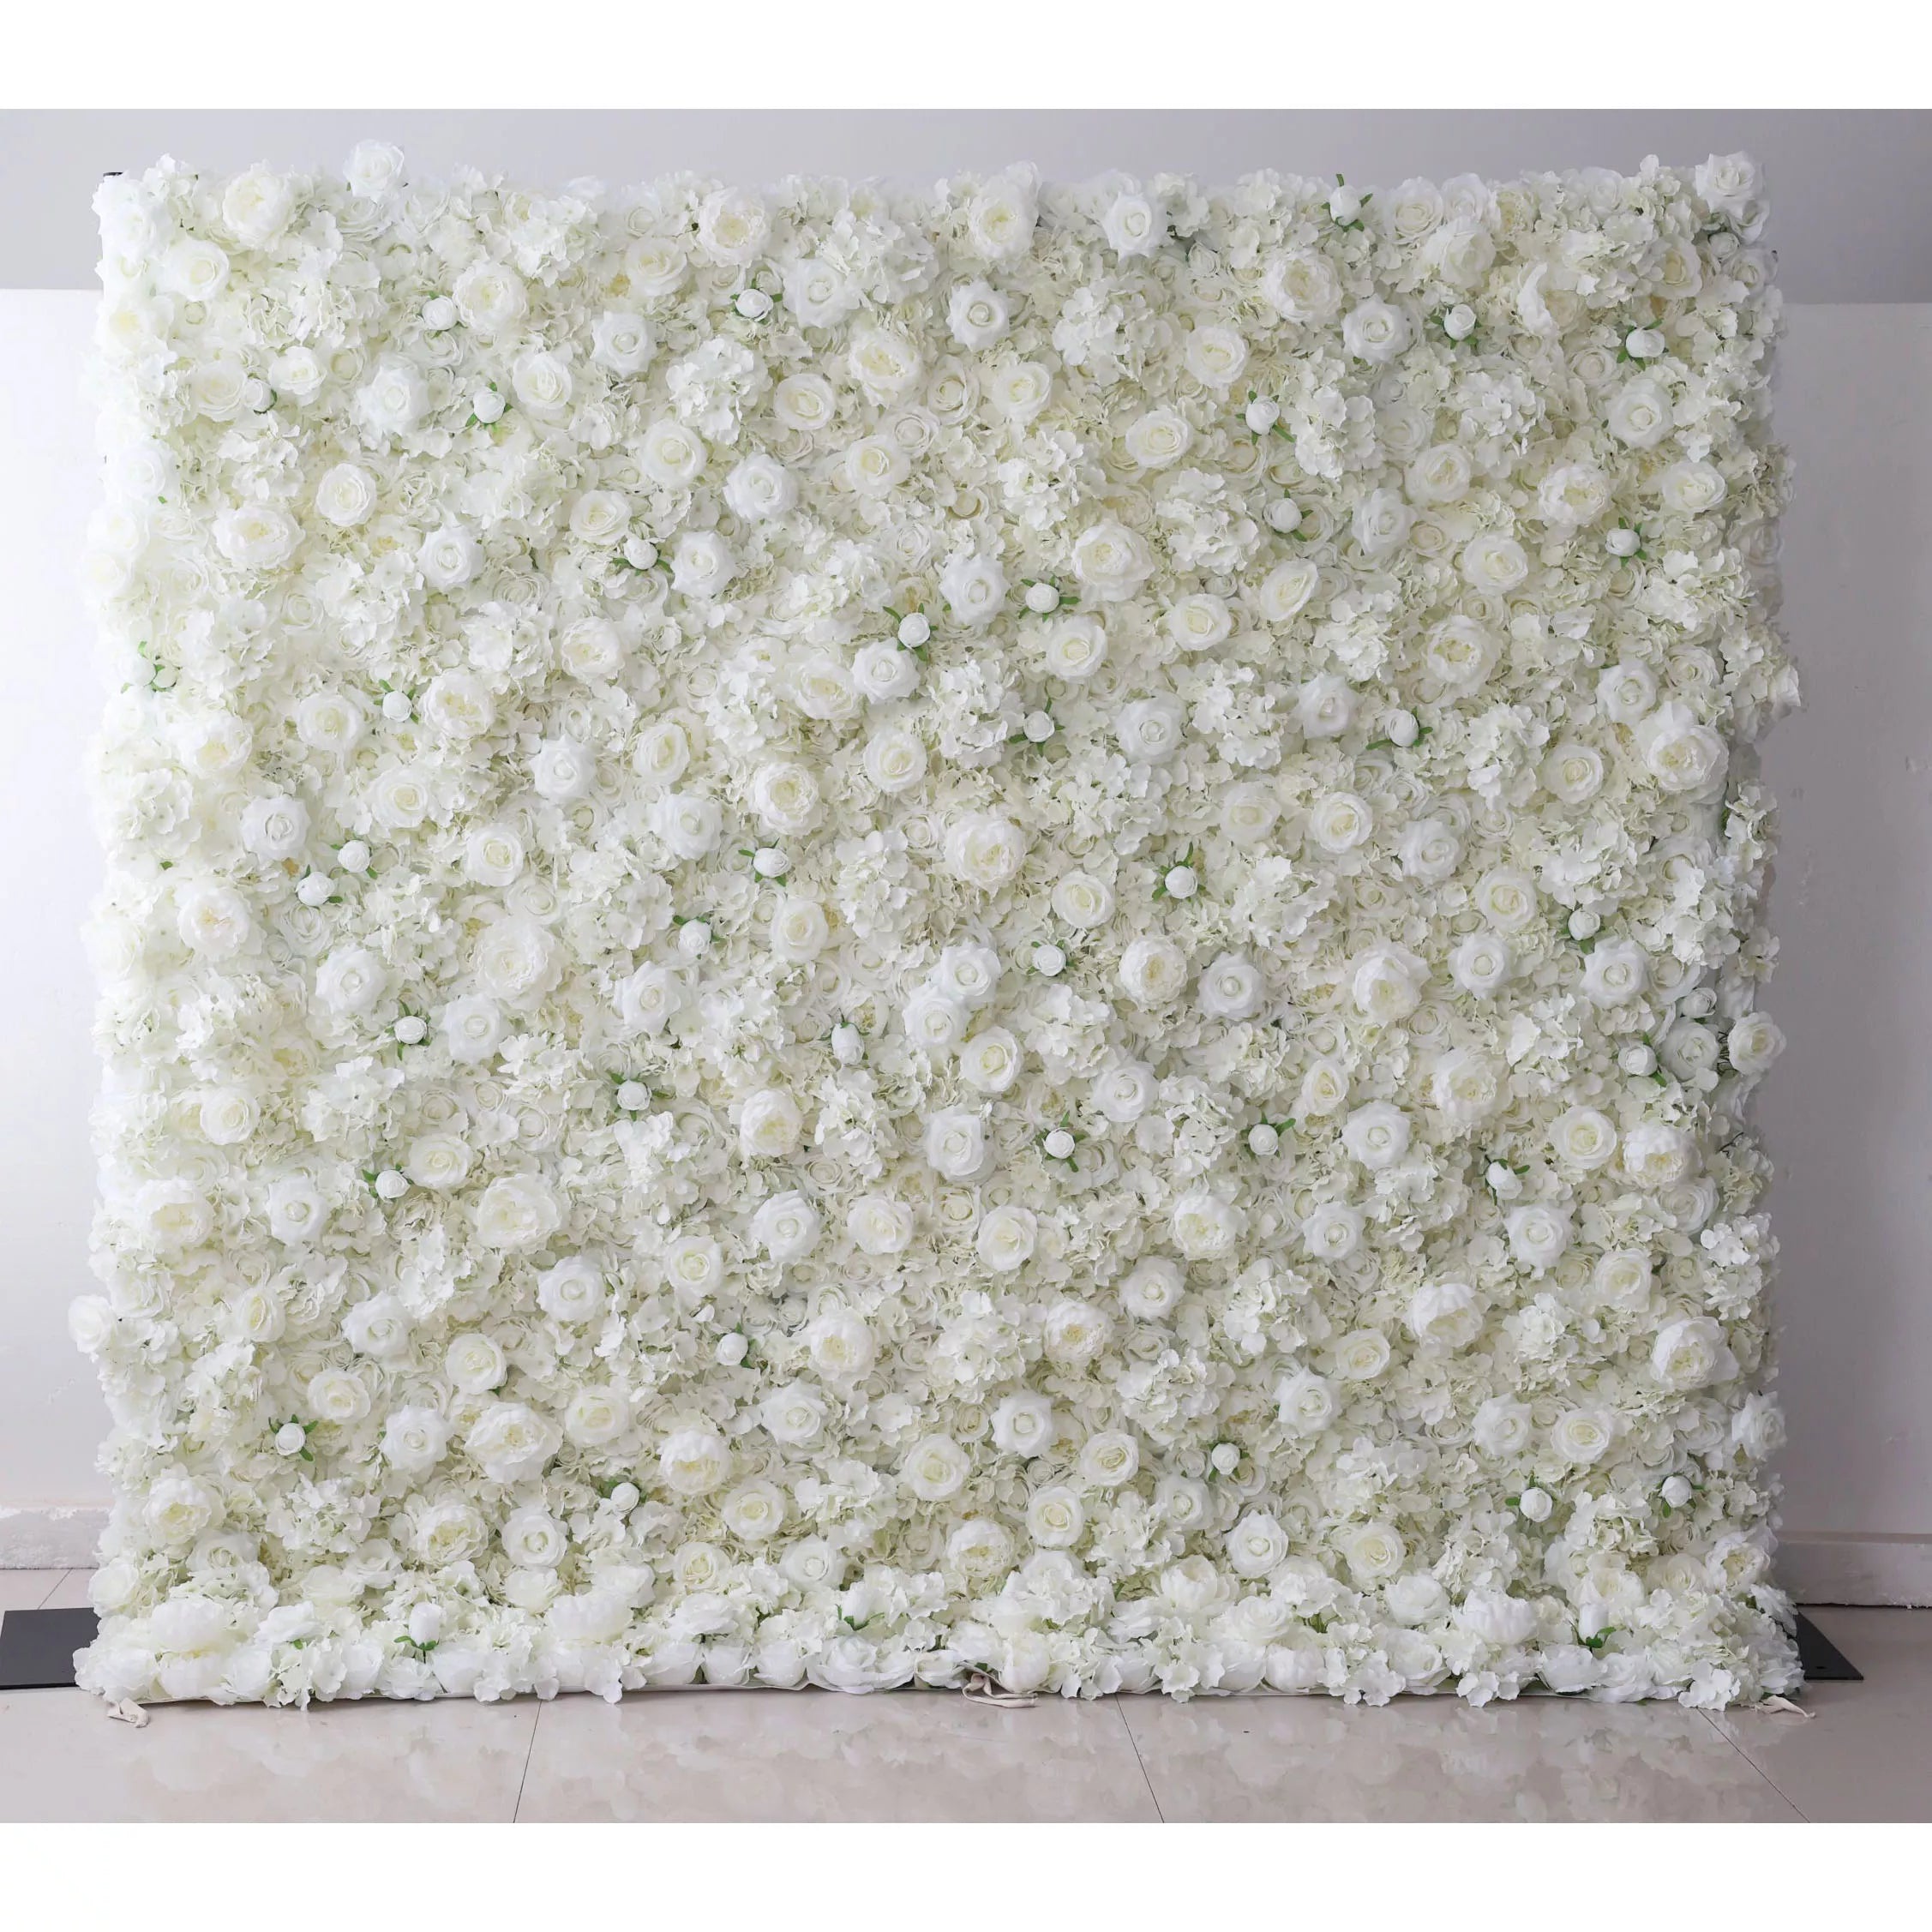 5D Roll up Artificial Flower Wall Wedding Backdrop Party Decoration